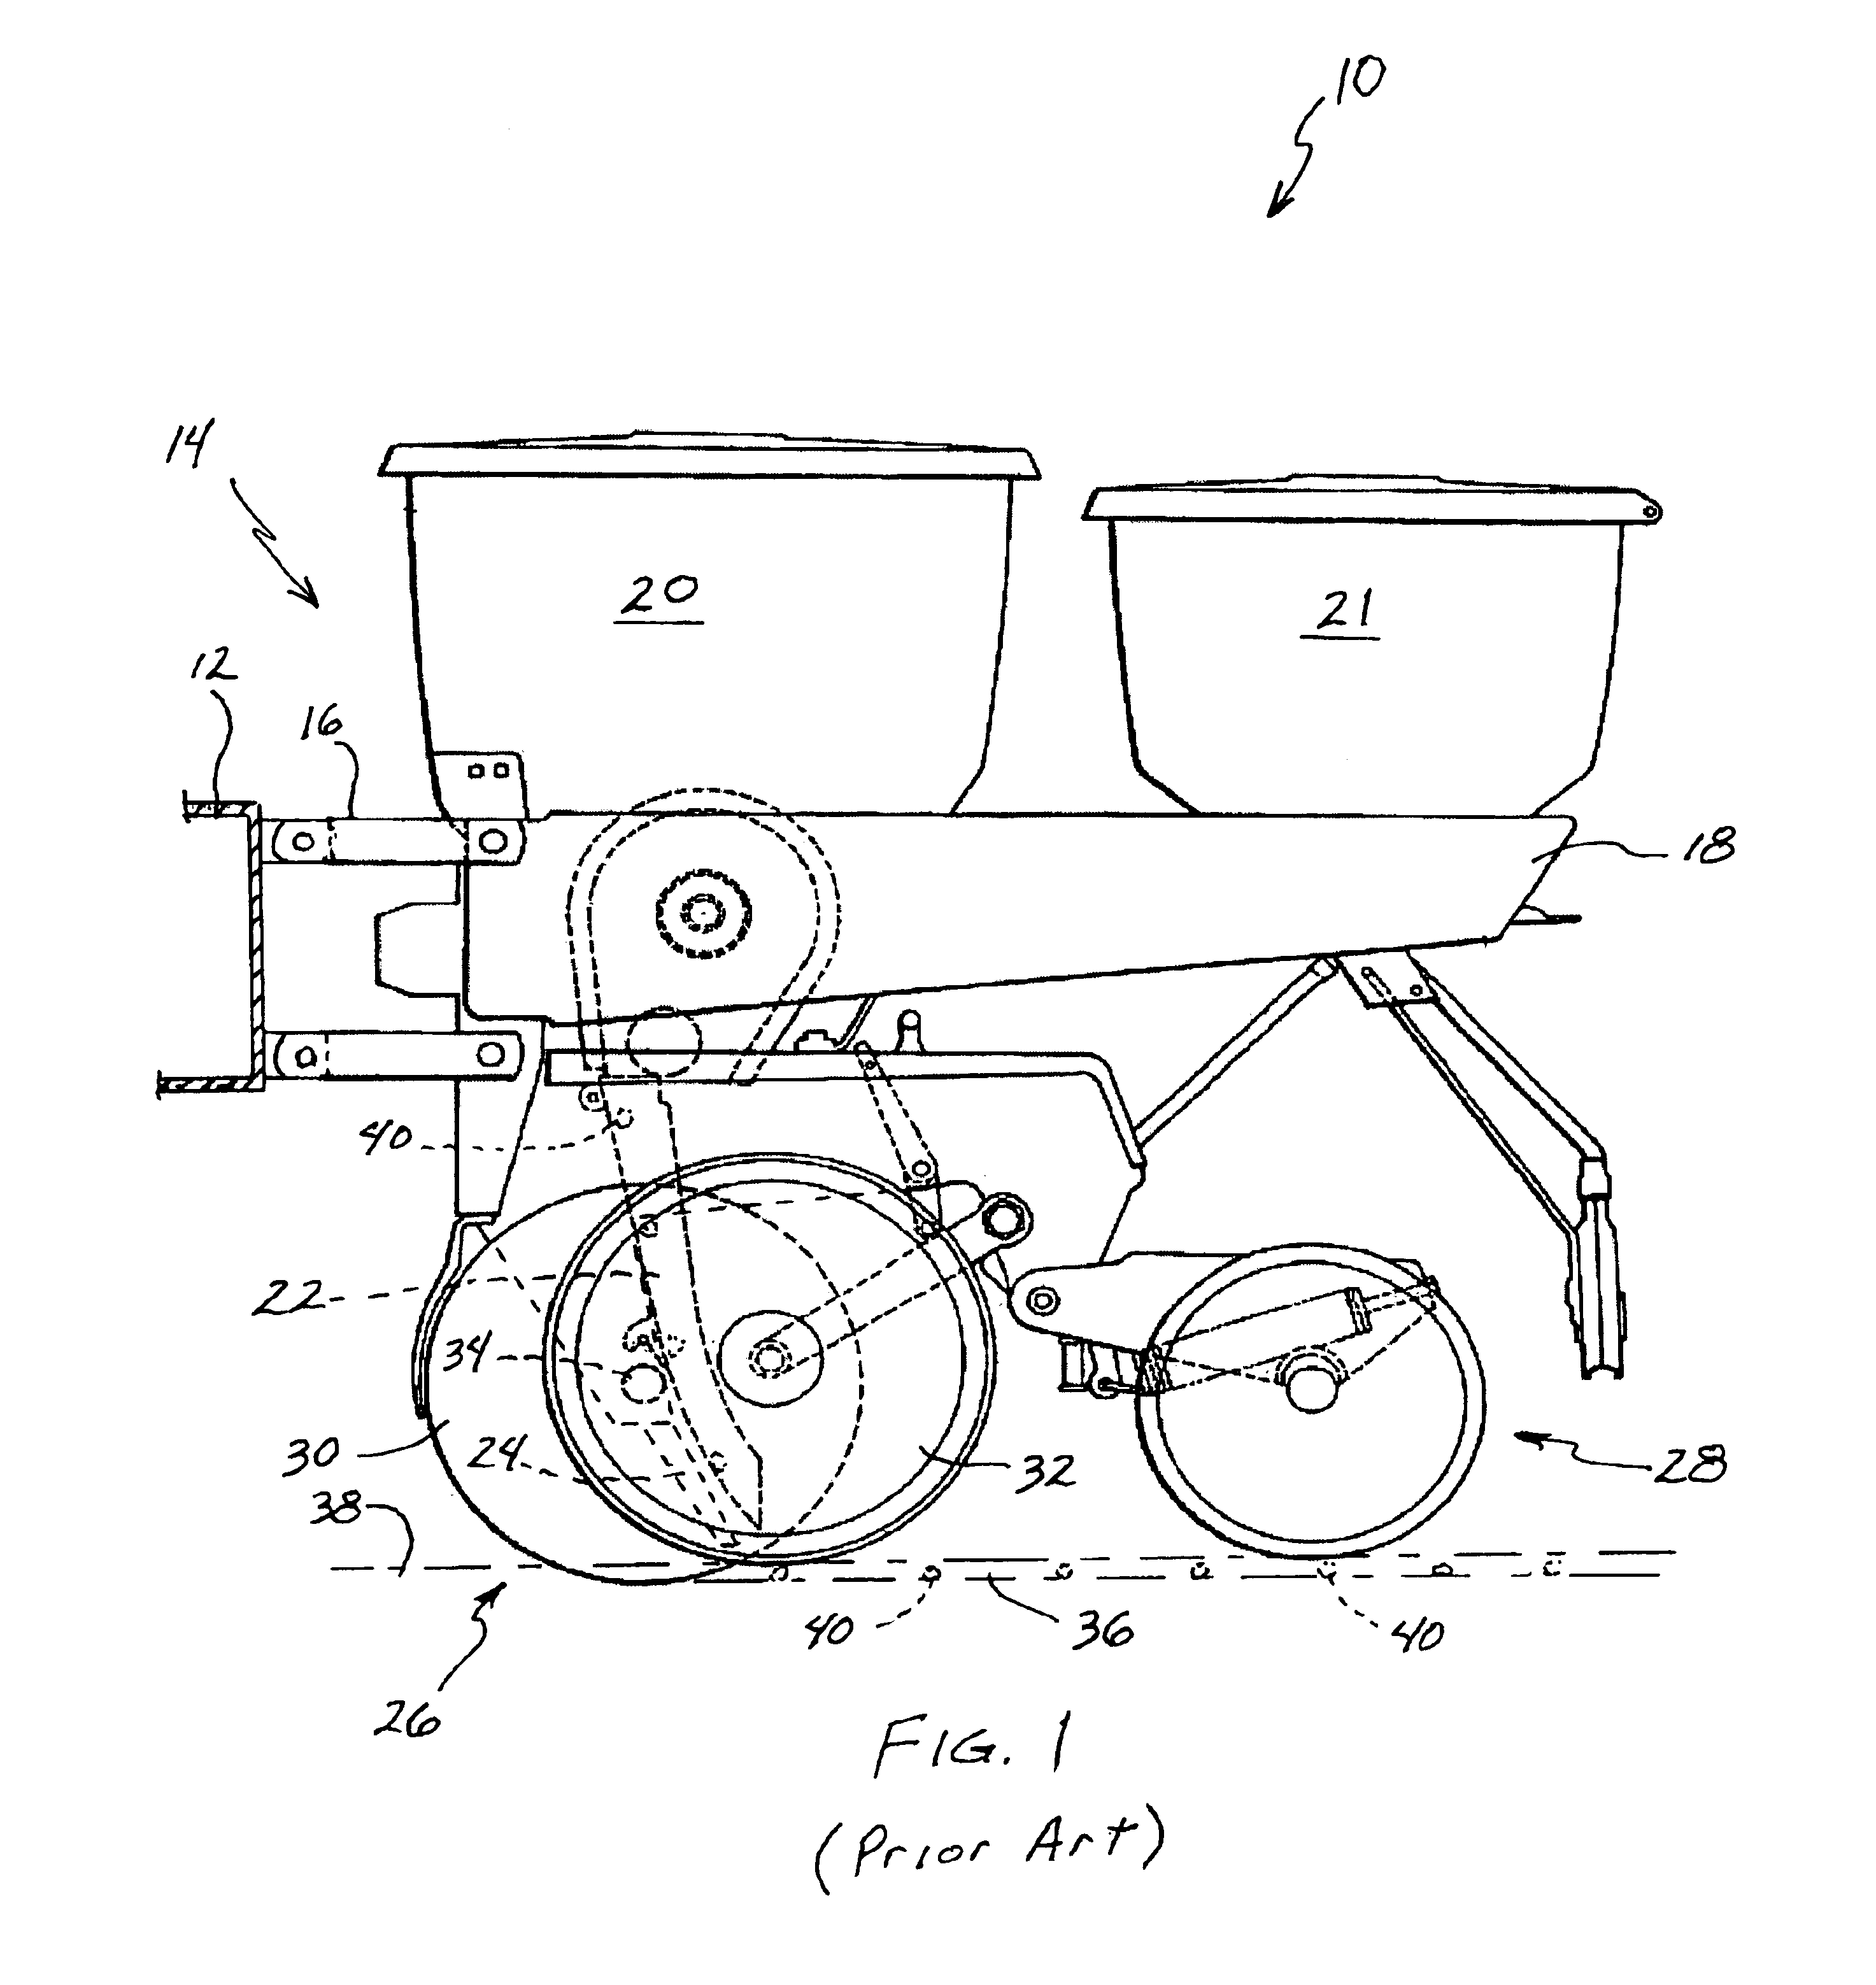 Planter bracket assembly for supporting appurtenances in substantial alignment with the seed tube